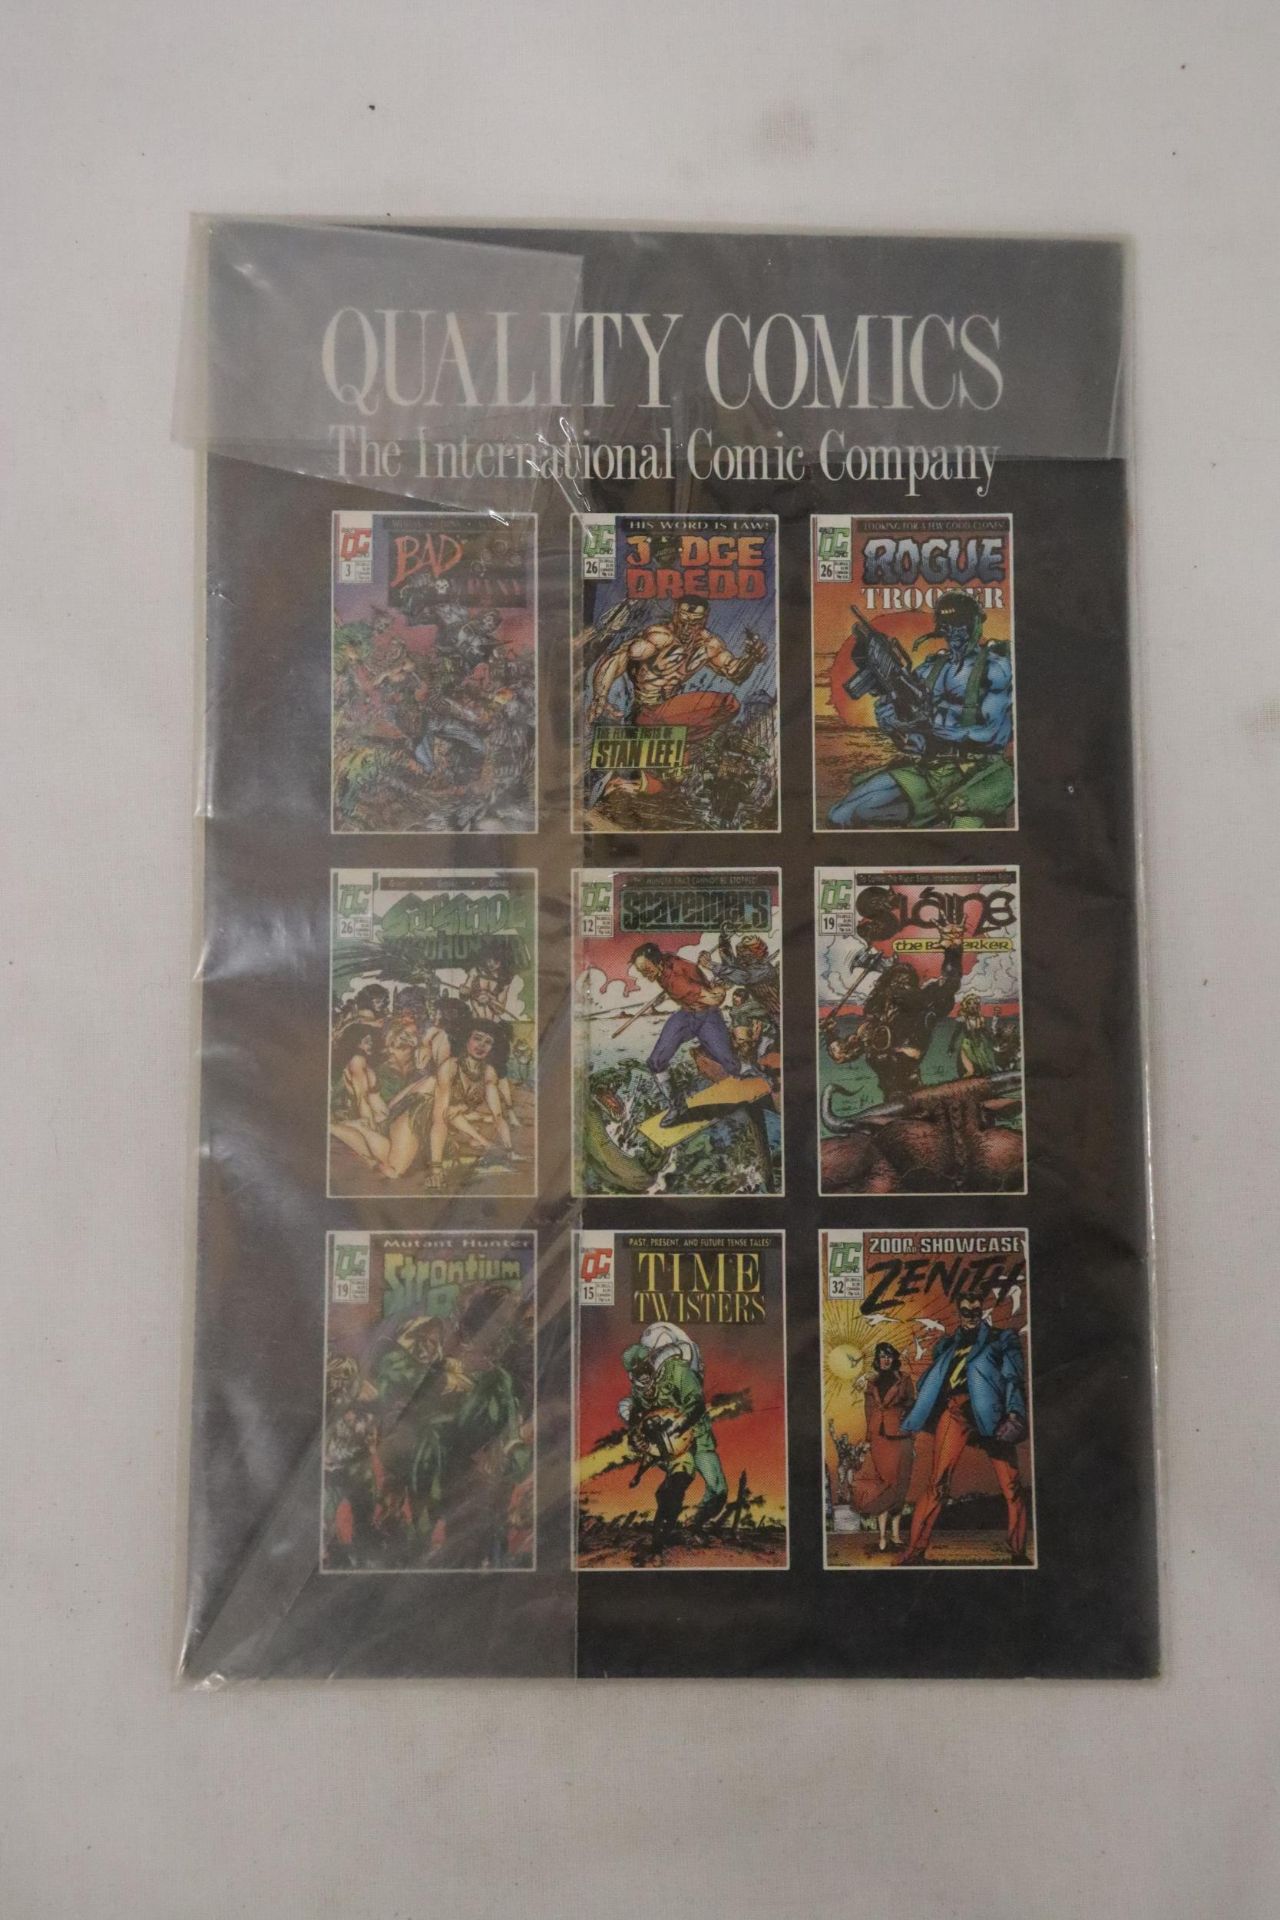 A SAM SLADE, BOROHUNTER COMIC, BY QUALITY COMICS, ISSUE 26, GOOD CONDITION - Image 4 of 4